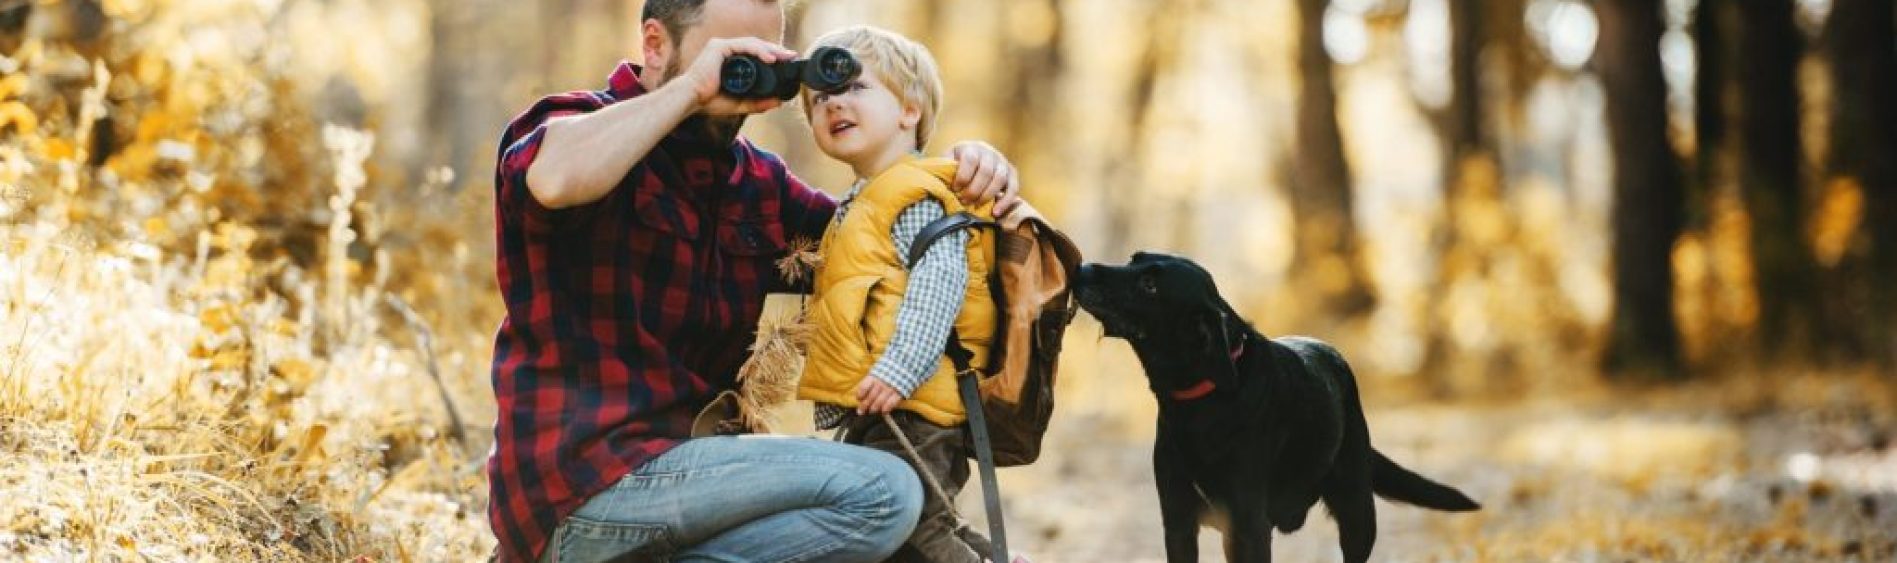 A mature father with a dog and a toddler son in an autumn forest, using binoculars.